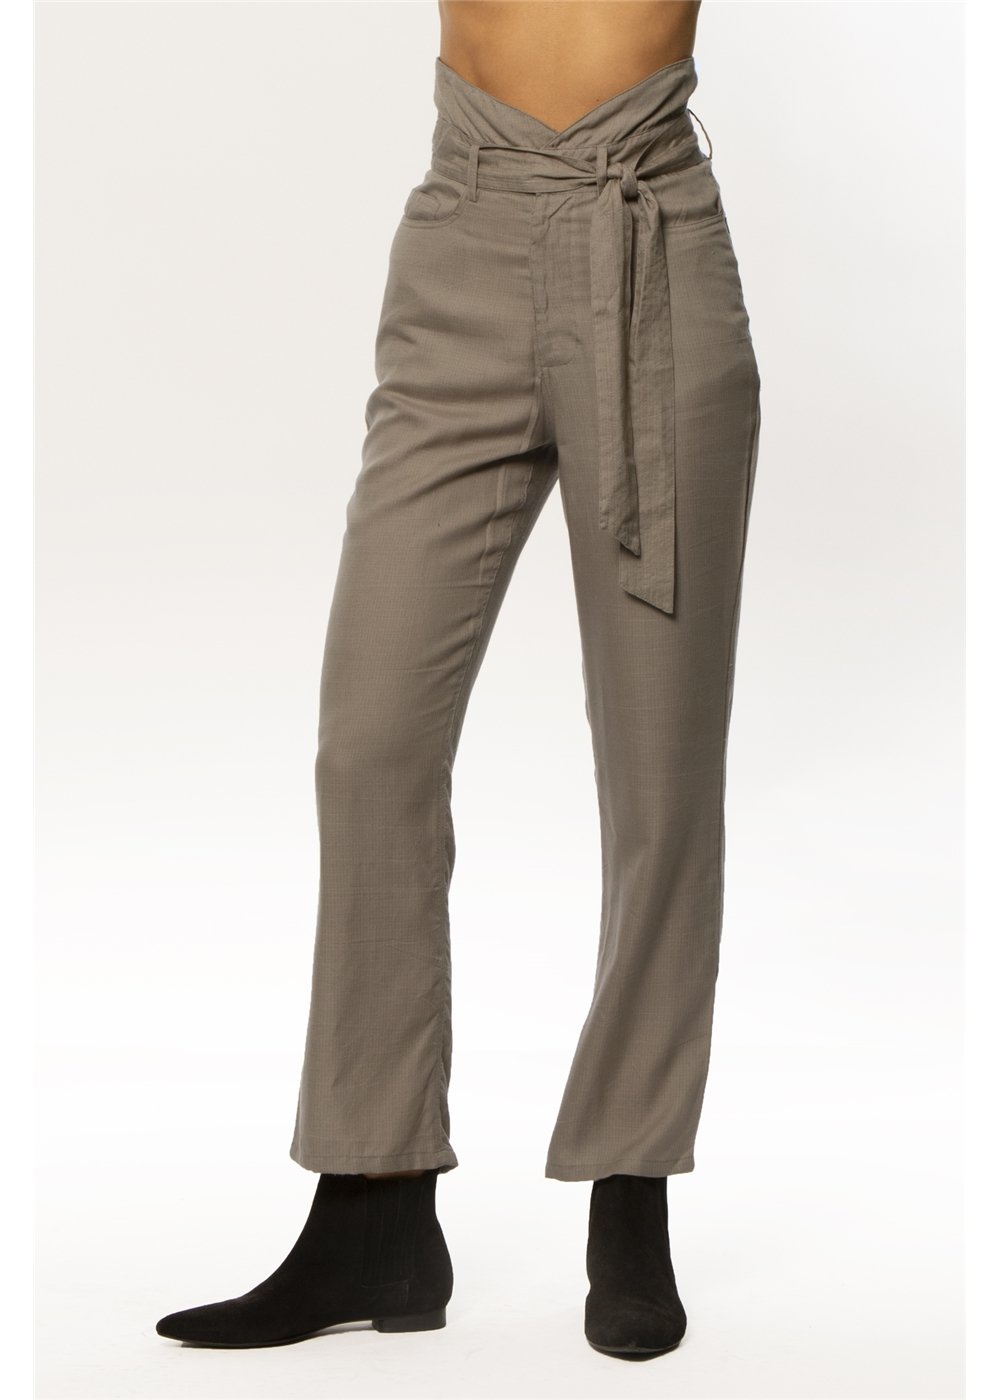 Amuse Society Women's Dolly Woven Pant in Willow. Front View on Model.